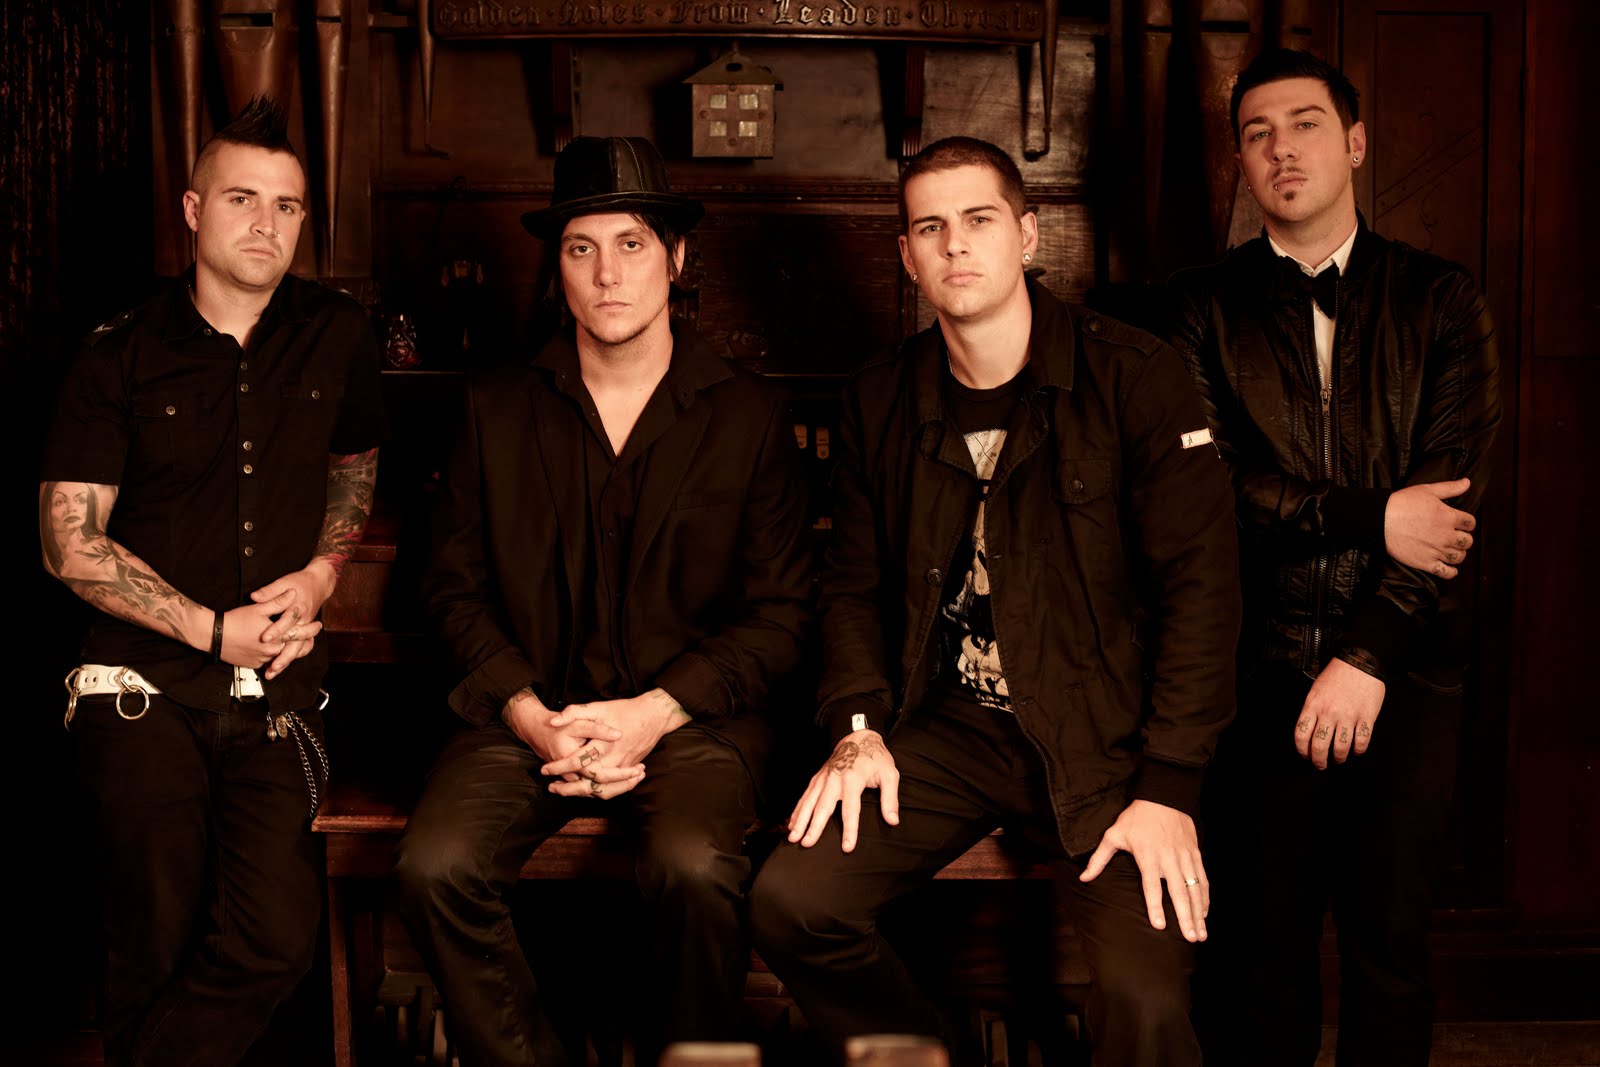 Wallpaper Avenged Sevenfold ~ Upgrade Flashing download Sofware and ...